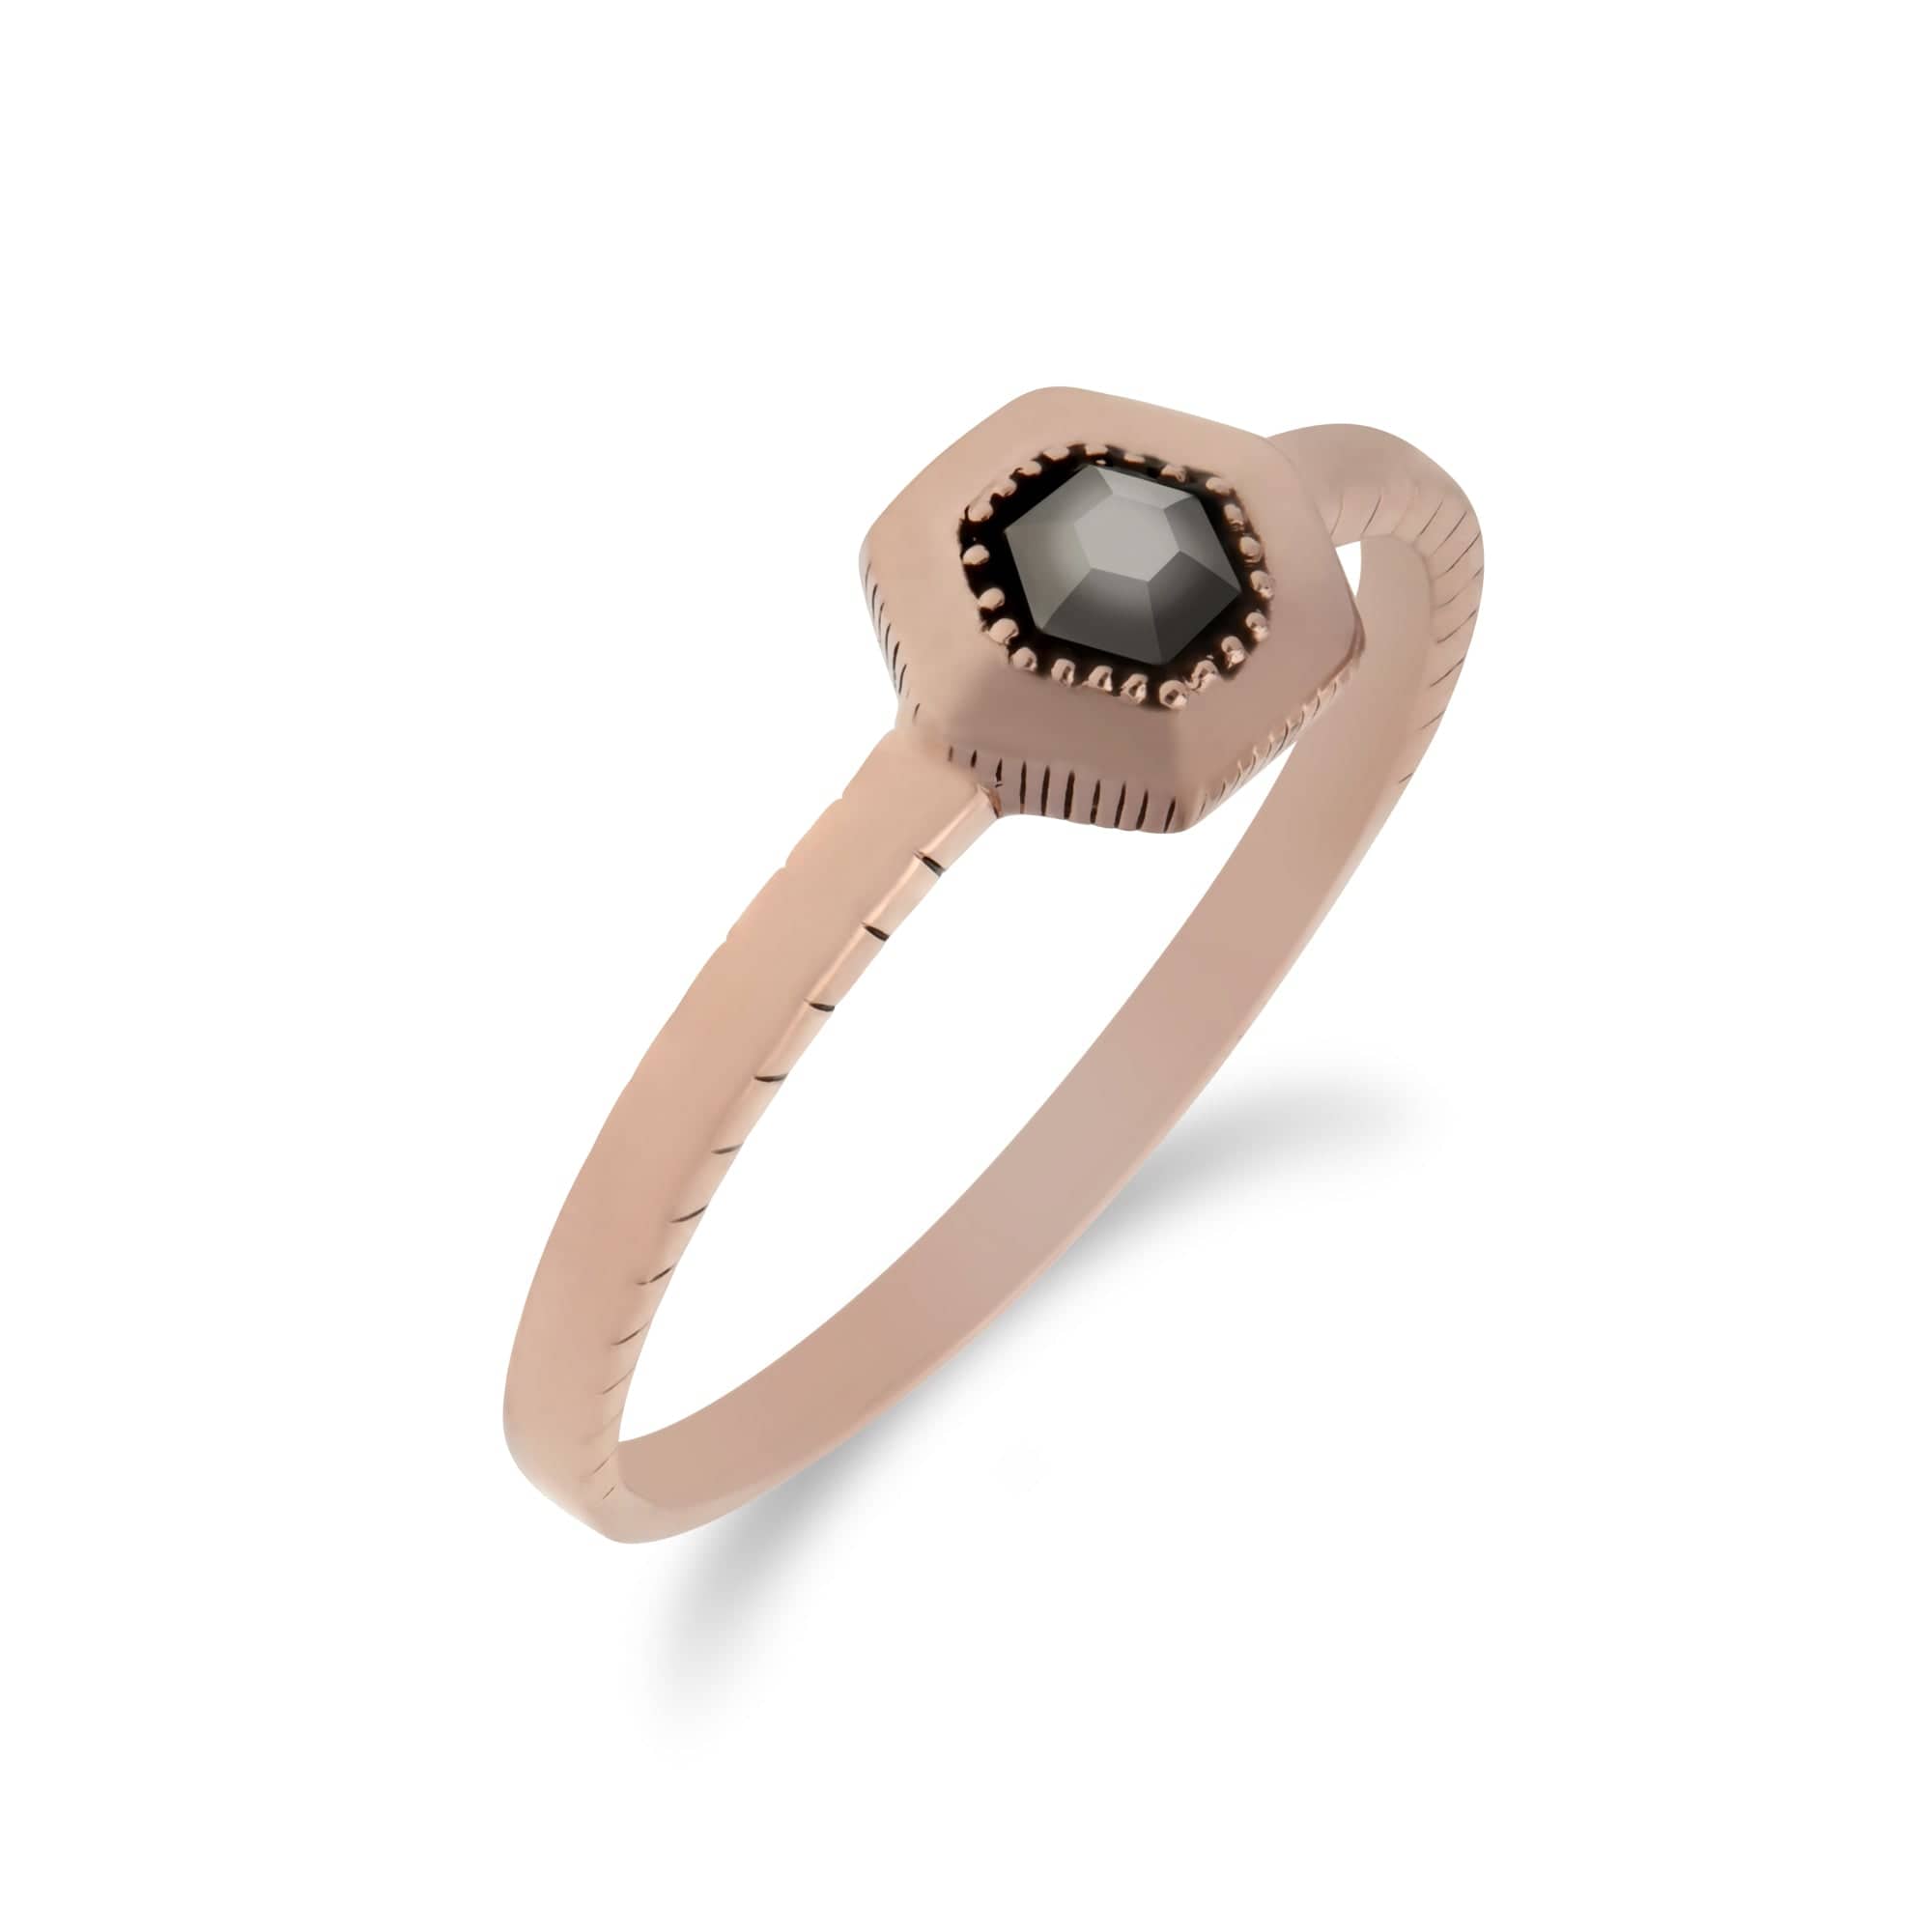 Rose Gold Plated Marcasite Hexagon Design Ring in 925 Sterling Silver - Gemondo